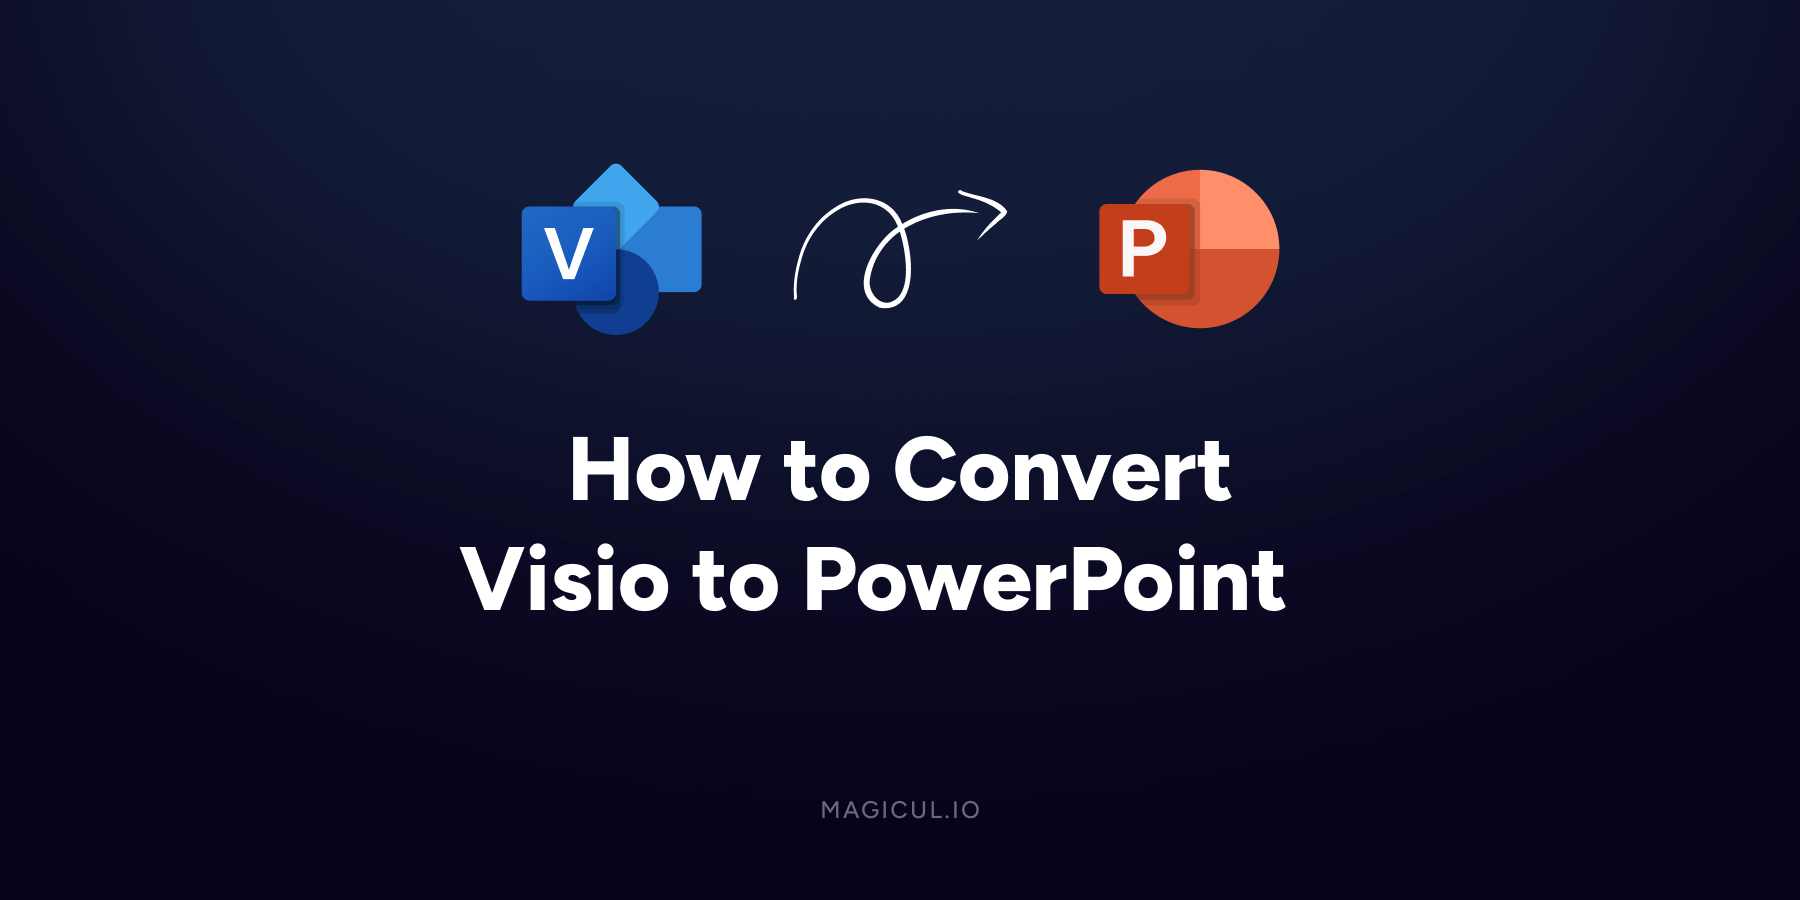 How to Convert Visio to PowerPoint